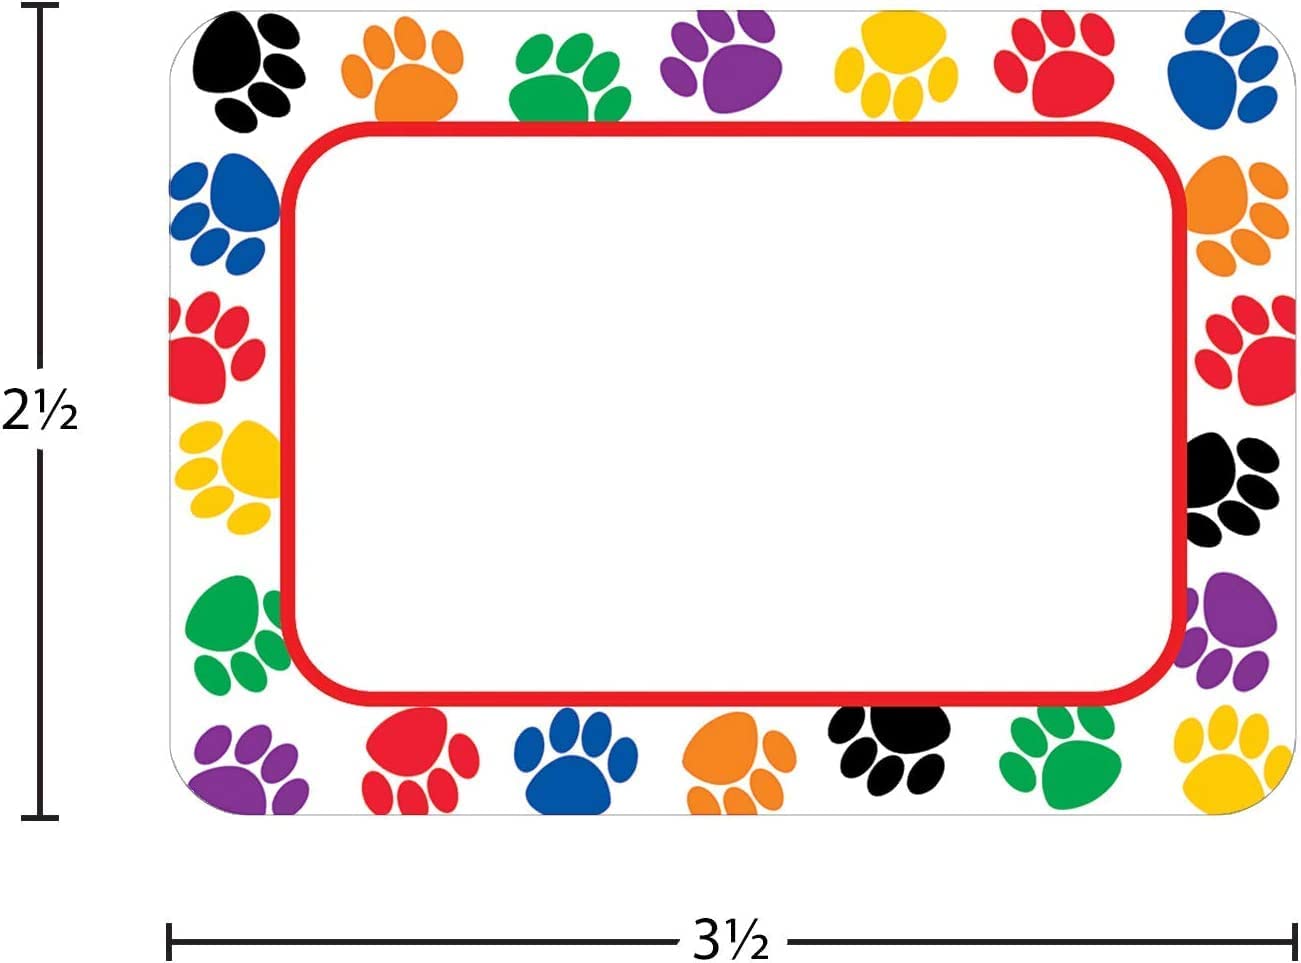 Name Tag Sticker with colorful paw print